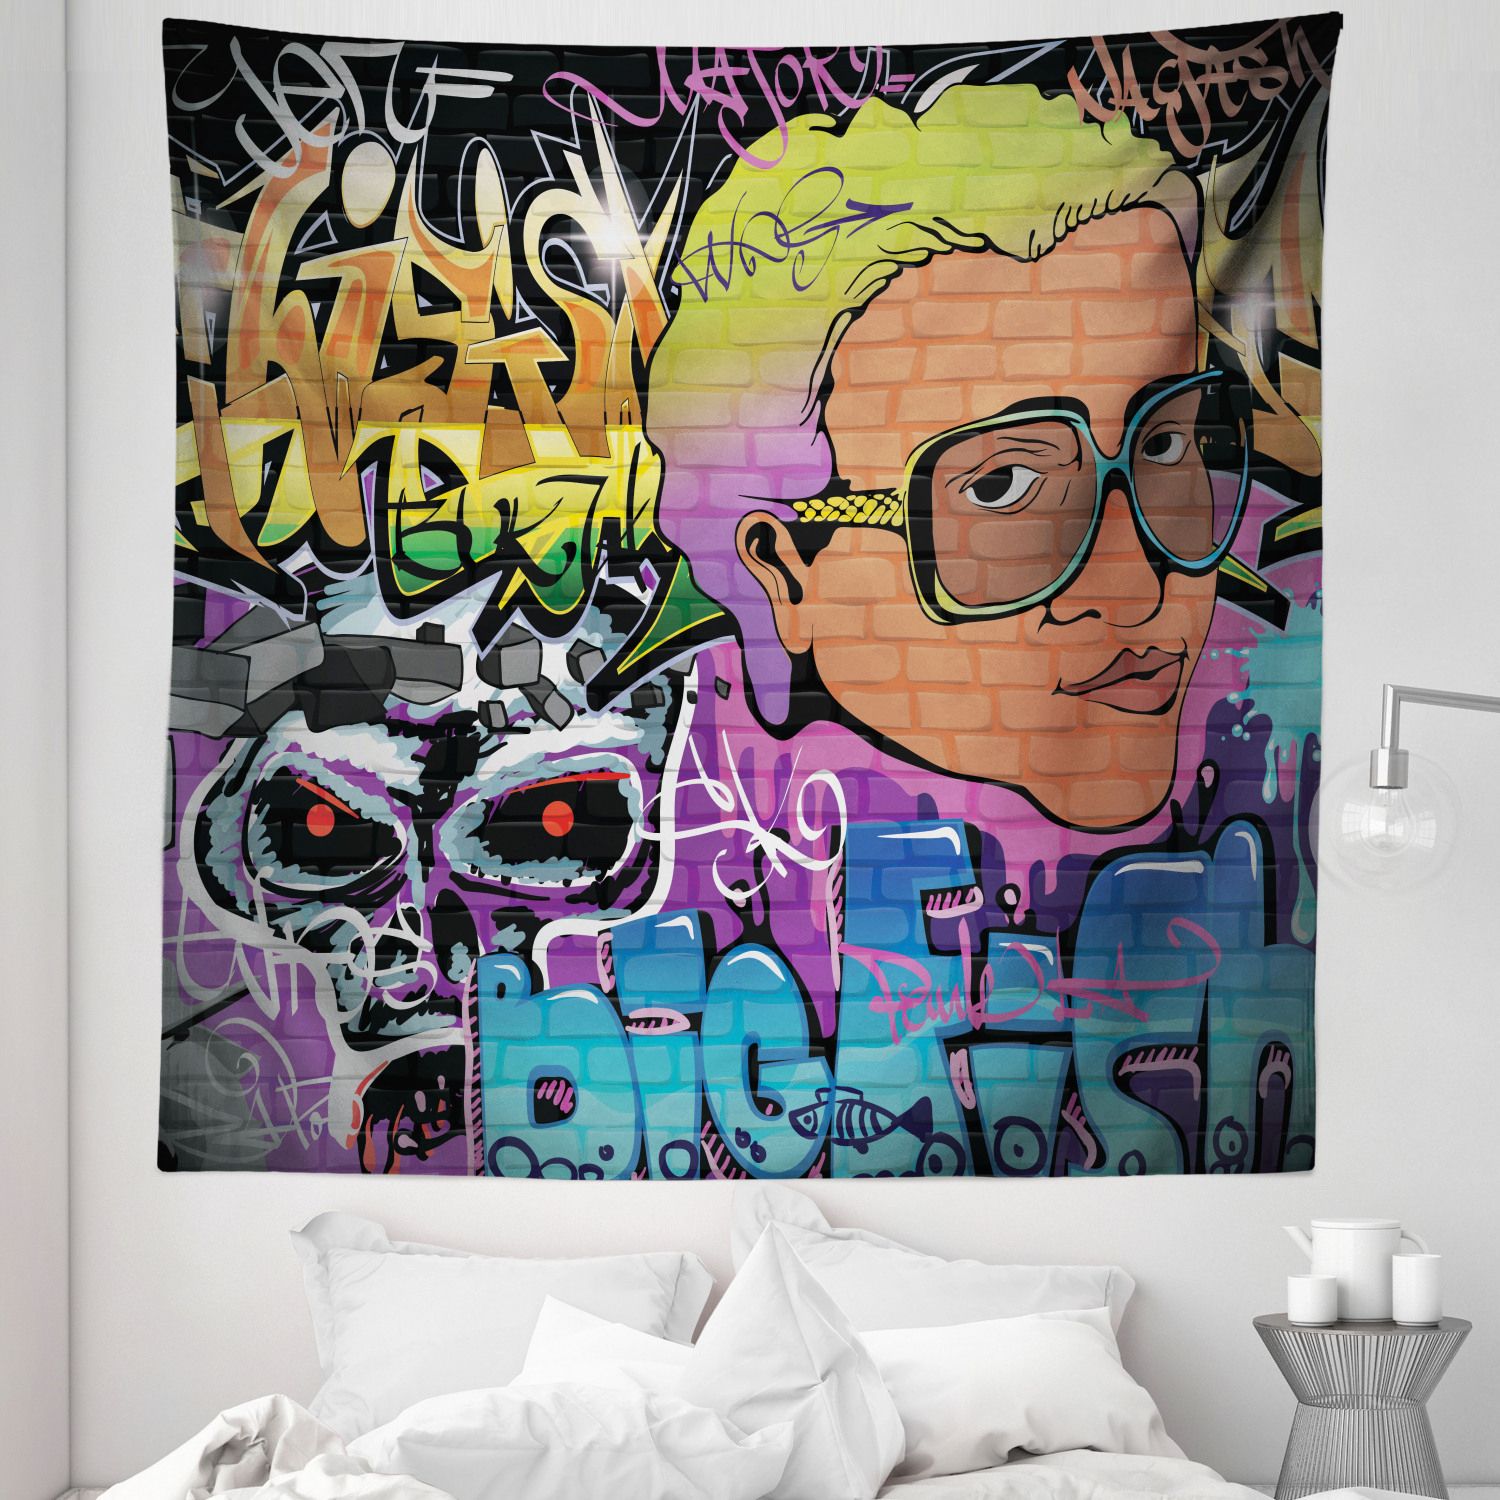 Urban Graffiti Tapestry, Hip Hop Design Graffiti Wall Urban Art Background  Man Head Detail, Fabric Wall Hanging Decor For Bedroom Living Room Dorm, 5  Sizes, Multicolor,Ambesonne – Walmart Within Hip Hop Design Wall Art (View 12 of 15)